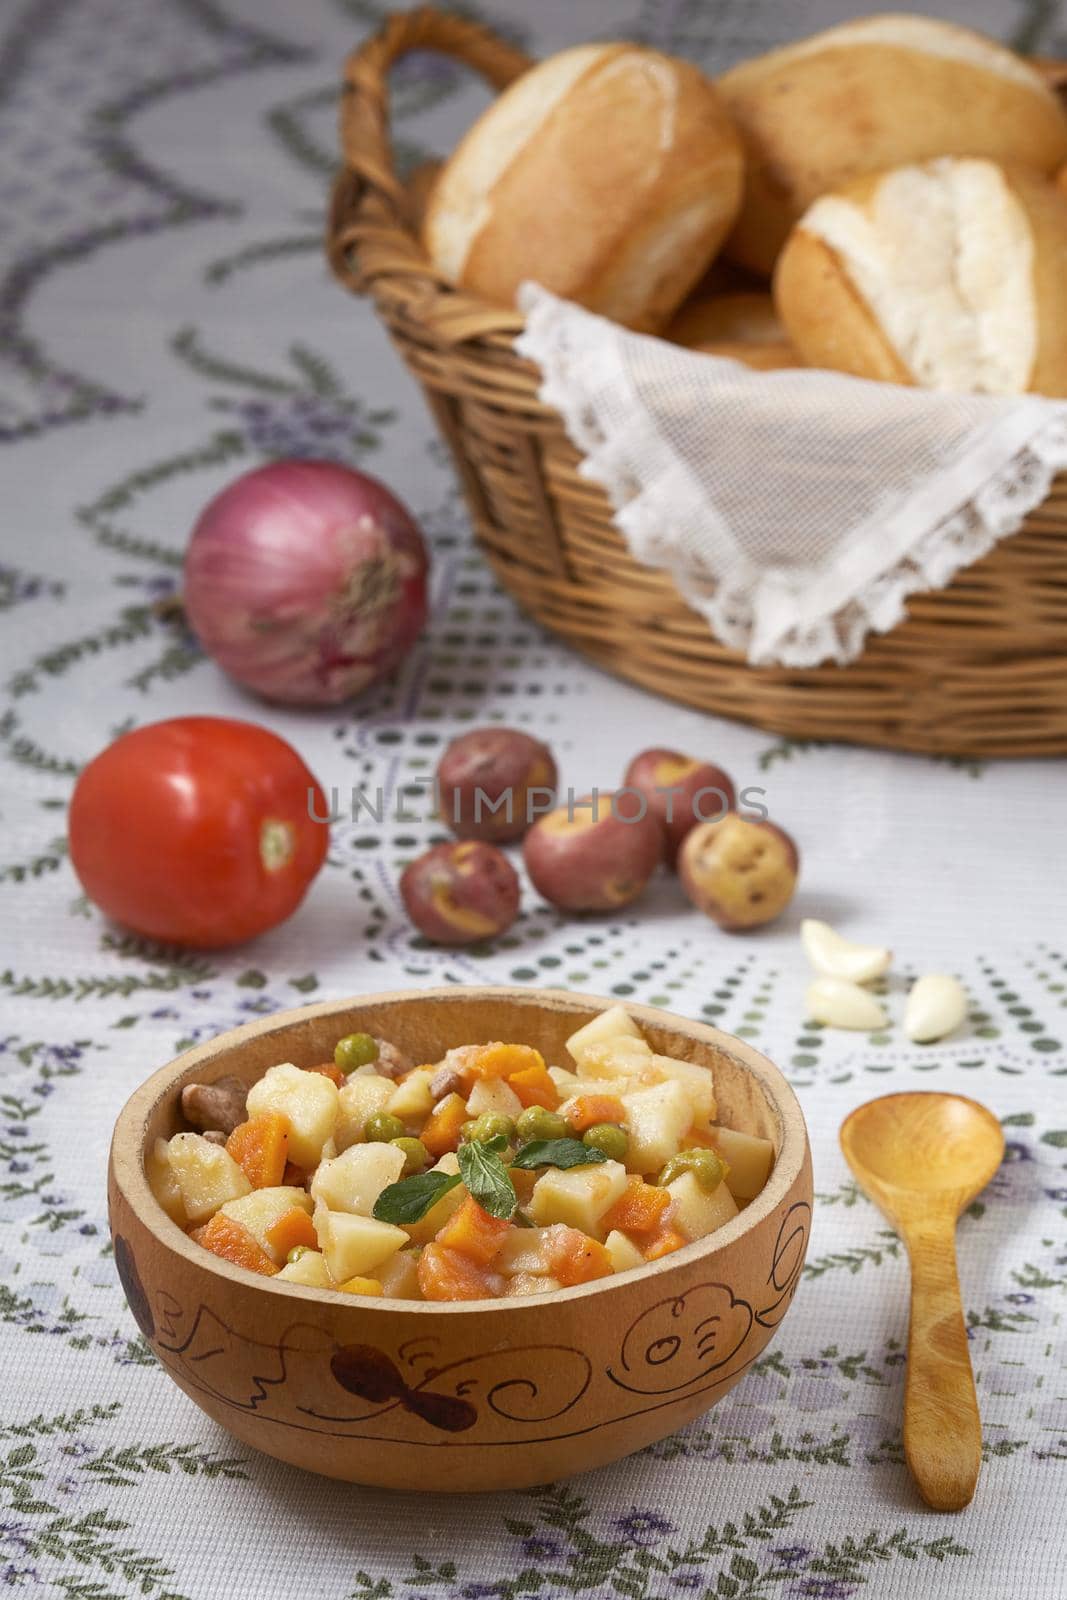 Traditional peruvian meal Matasquita with raw vegetable and basket of bread